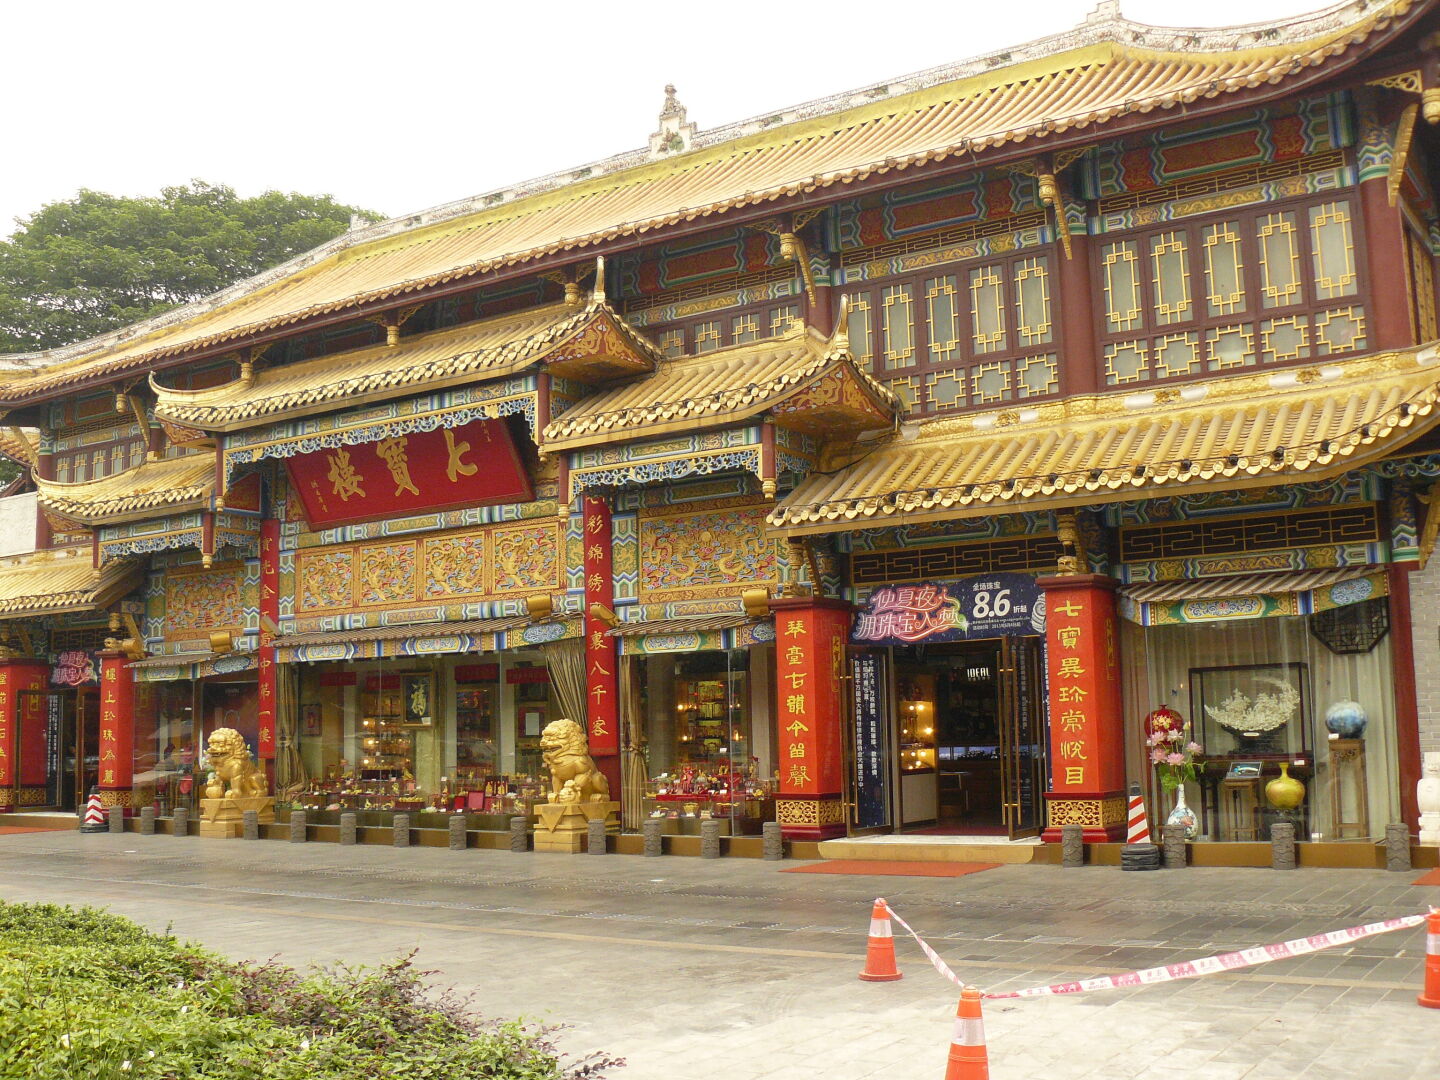 Qintai Road is full of richly decorated buildings, most of which contain jewellery shops or expensive-looking restaurants.